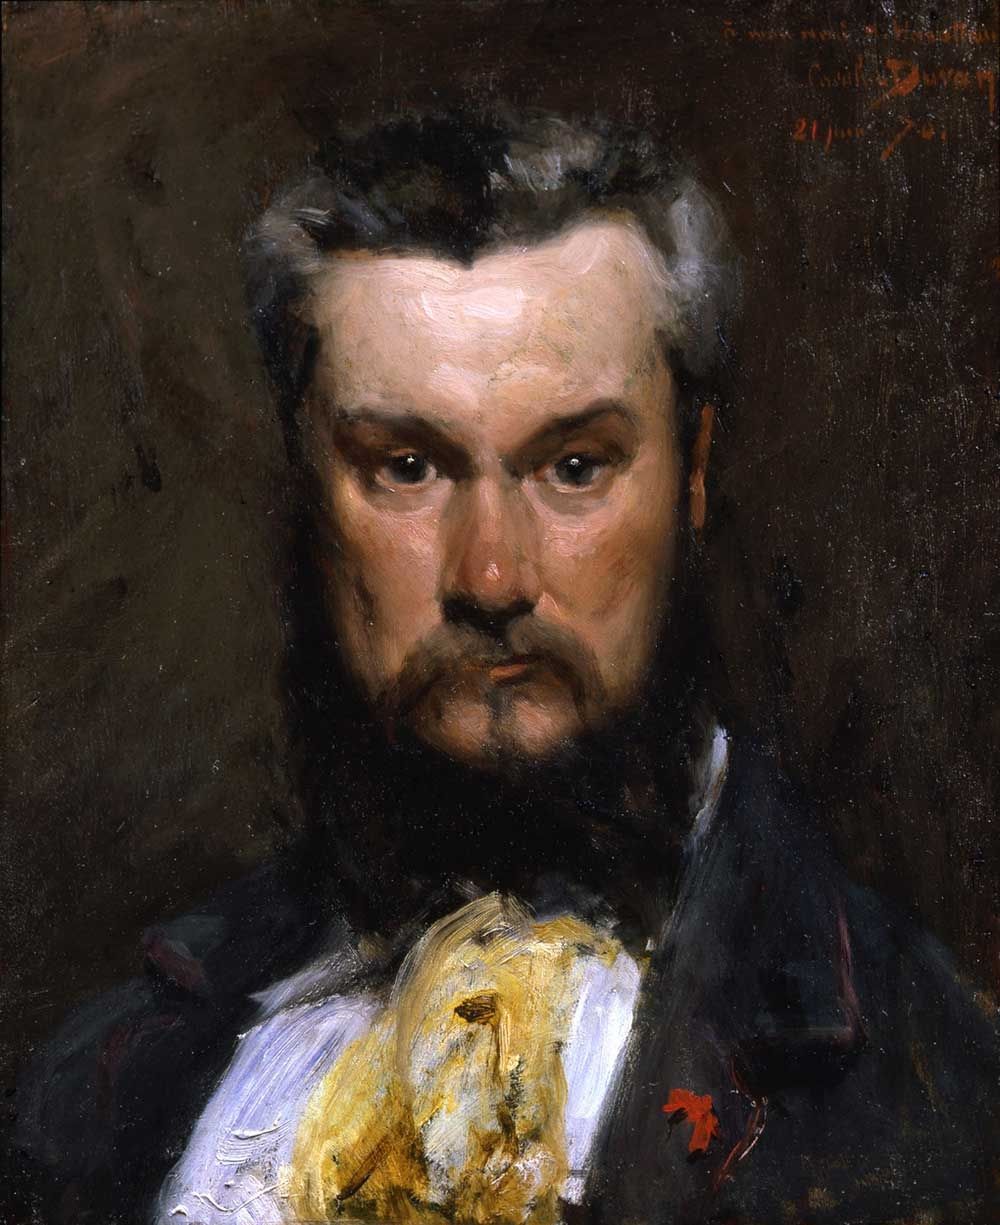 Carolus-Duran, Portrait of Hector Hanoteau, 1870, oil on panel, 23.5 x 20 inches